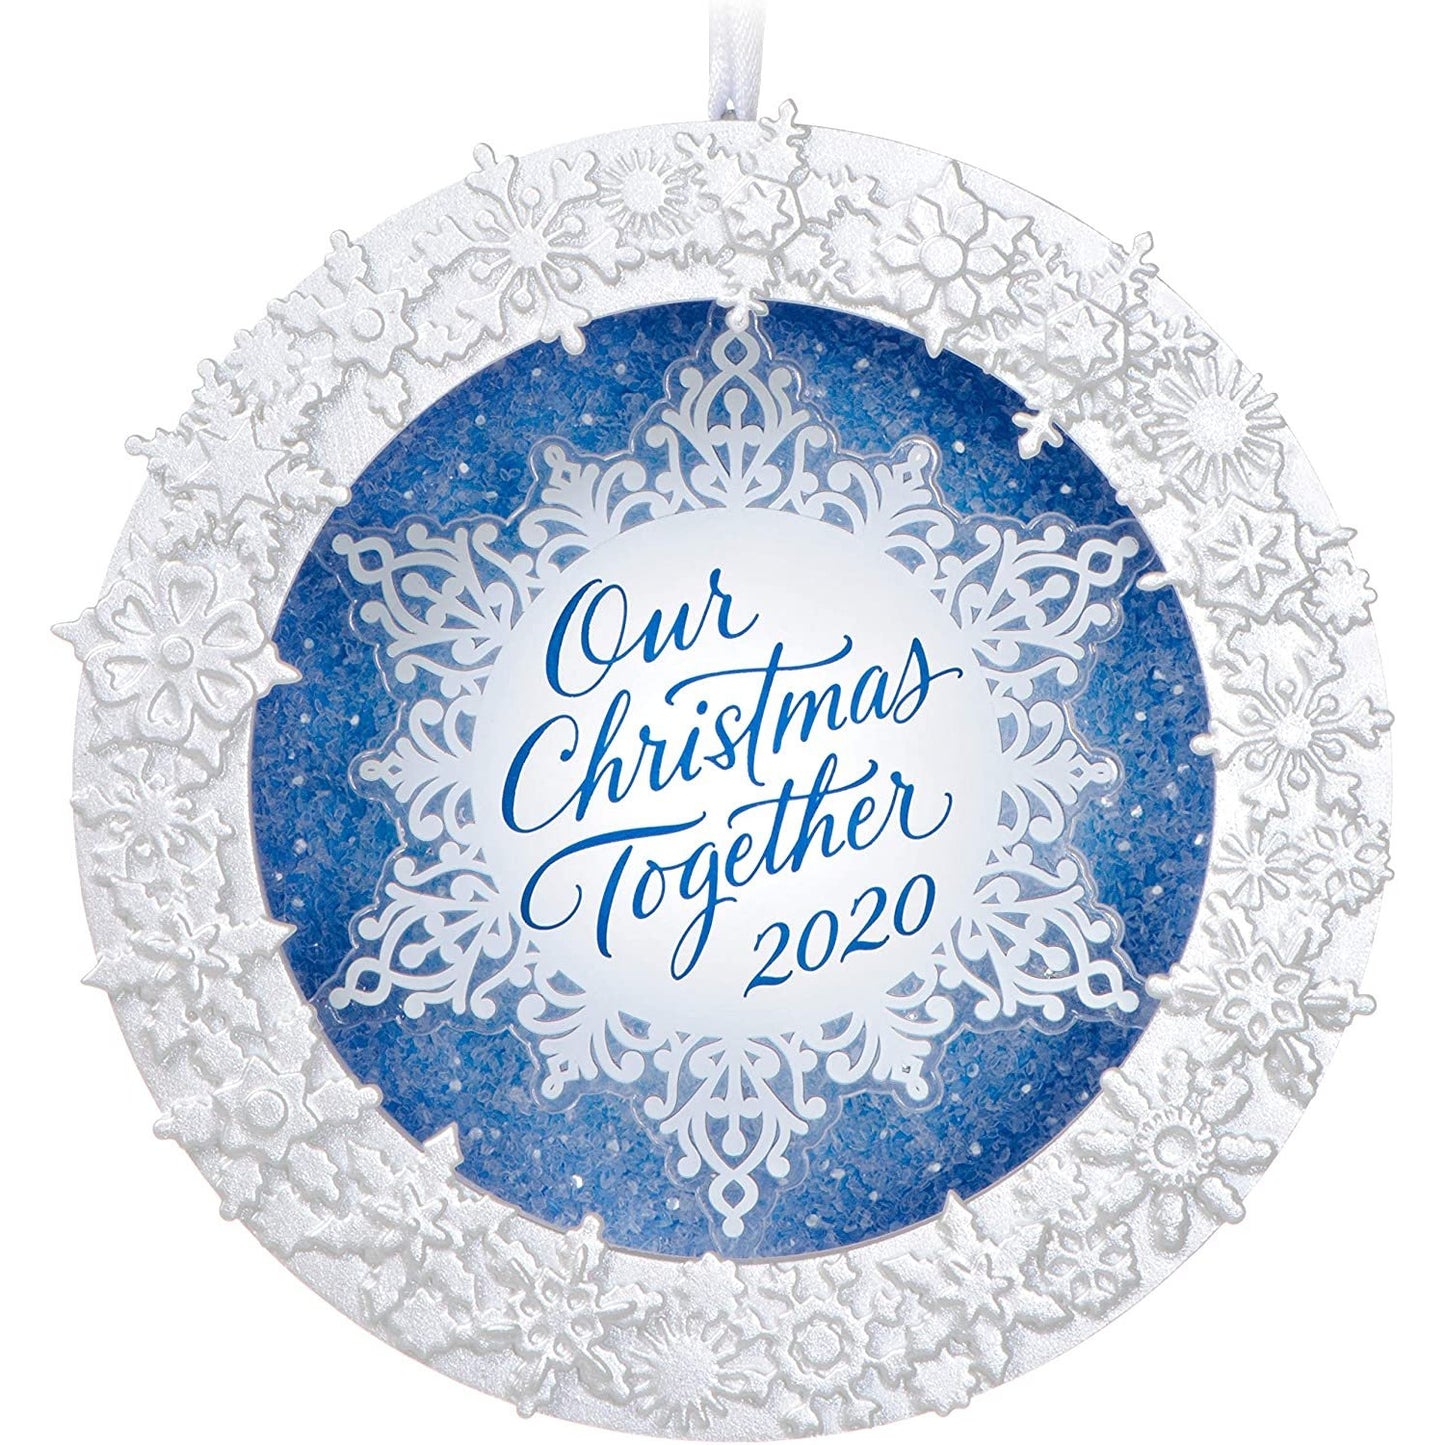 Hallmark Keepsake Ornament 2020 Year-Dated, Our Christmas Together